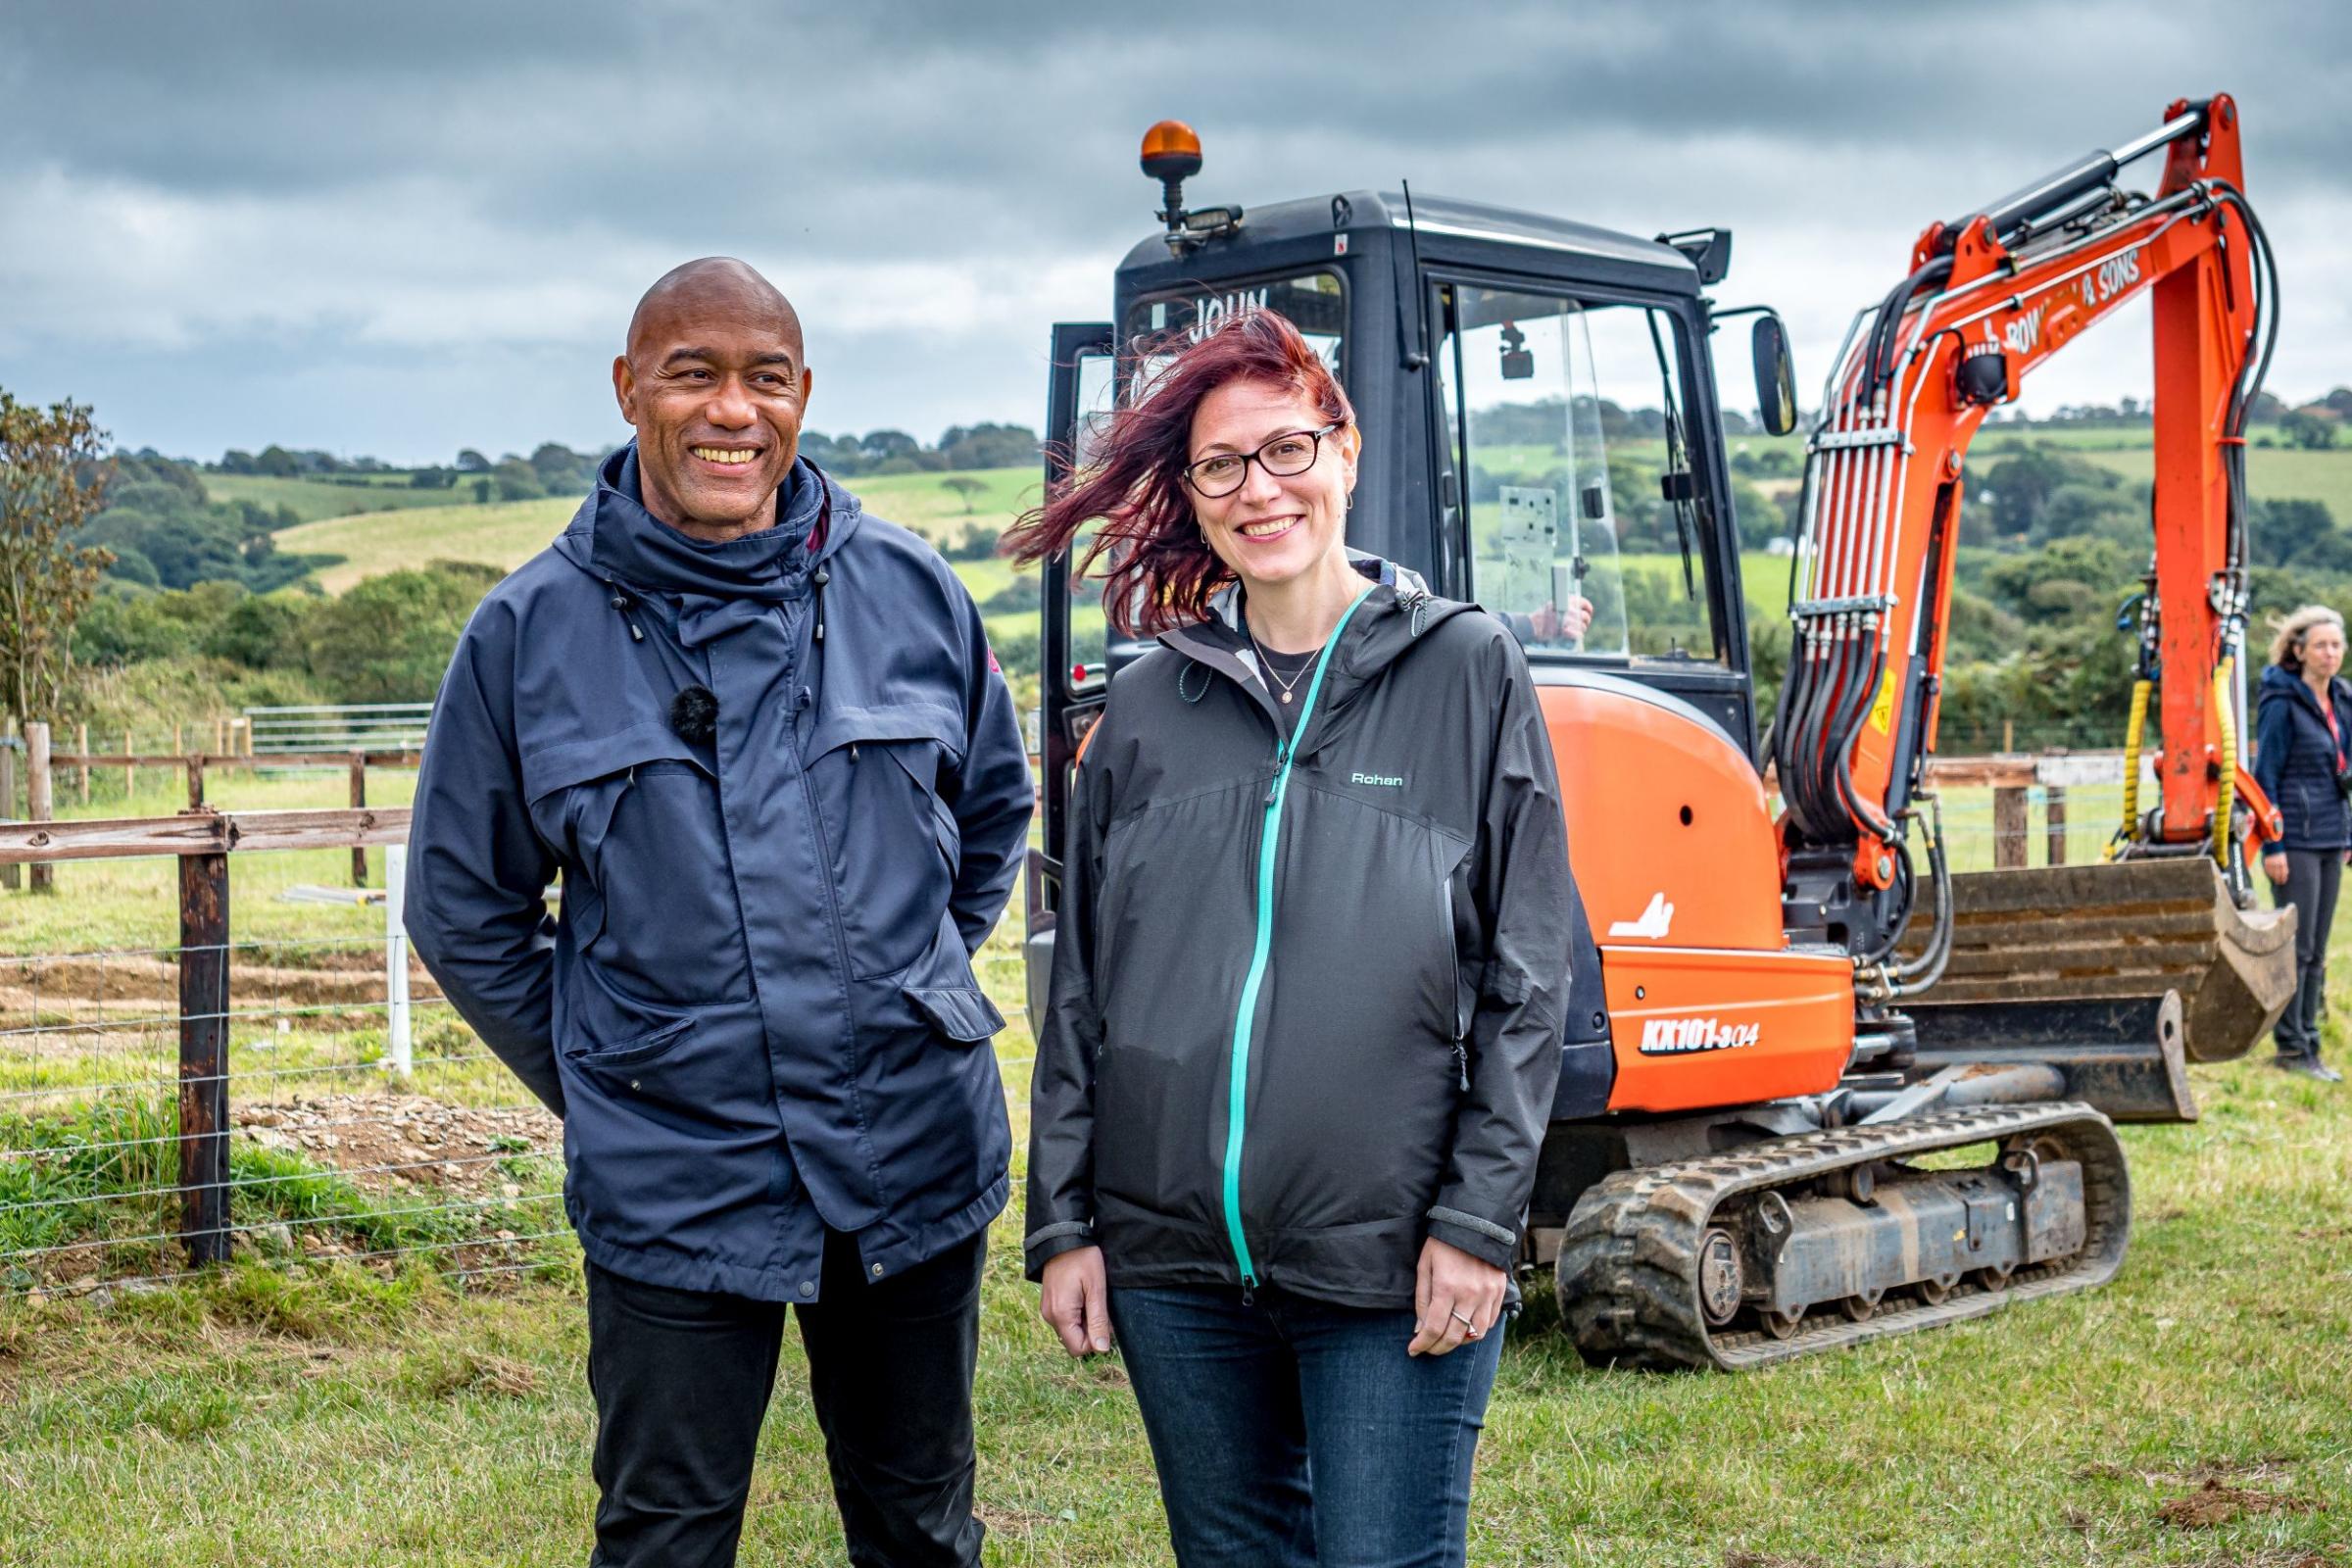 Time Team presenters Dr Gus Casely-Hayford and Natalie Haynes Picture: Charlie Newlands / Time Team